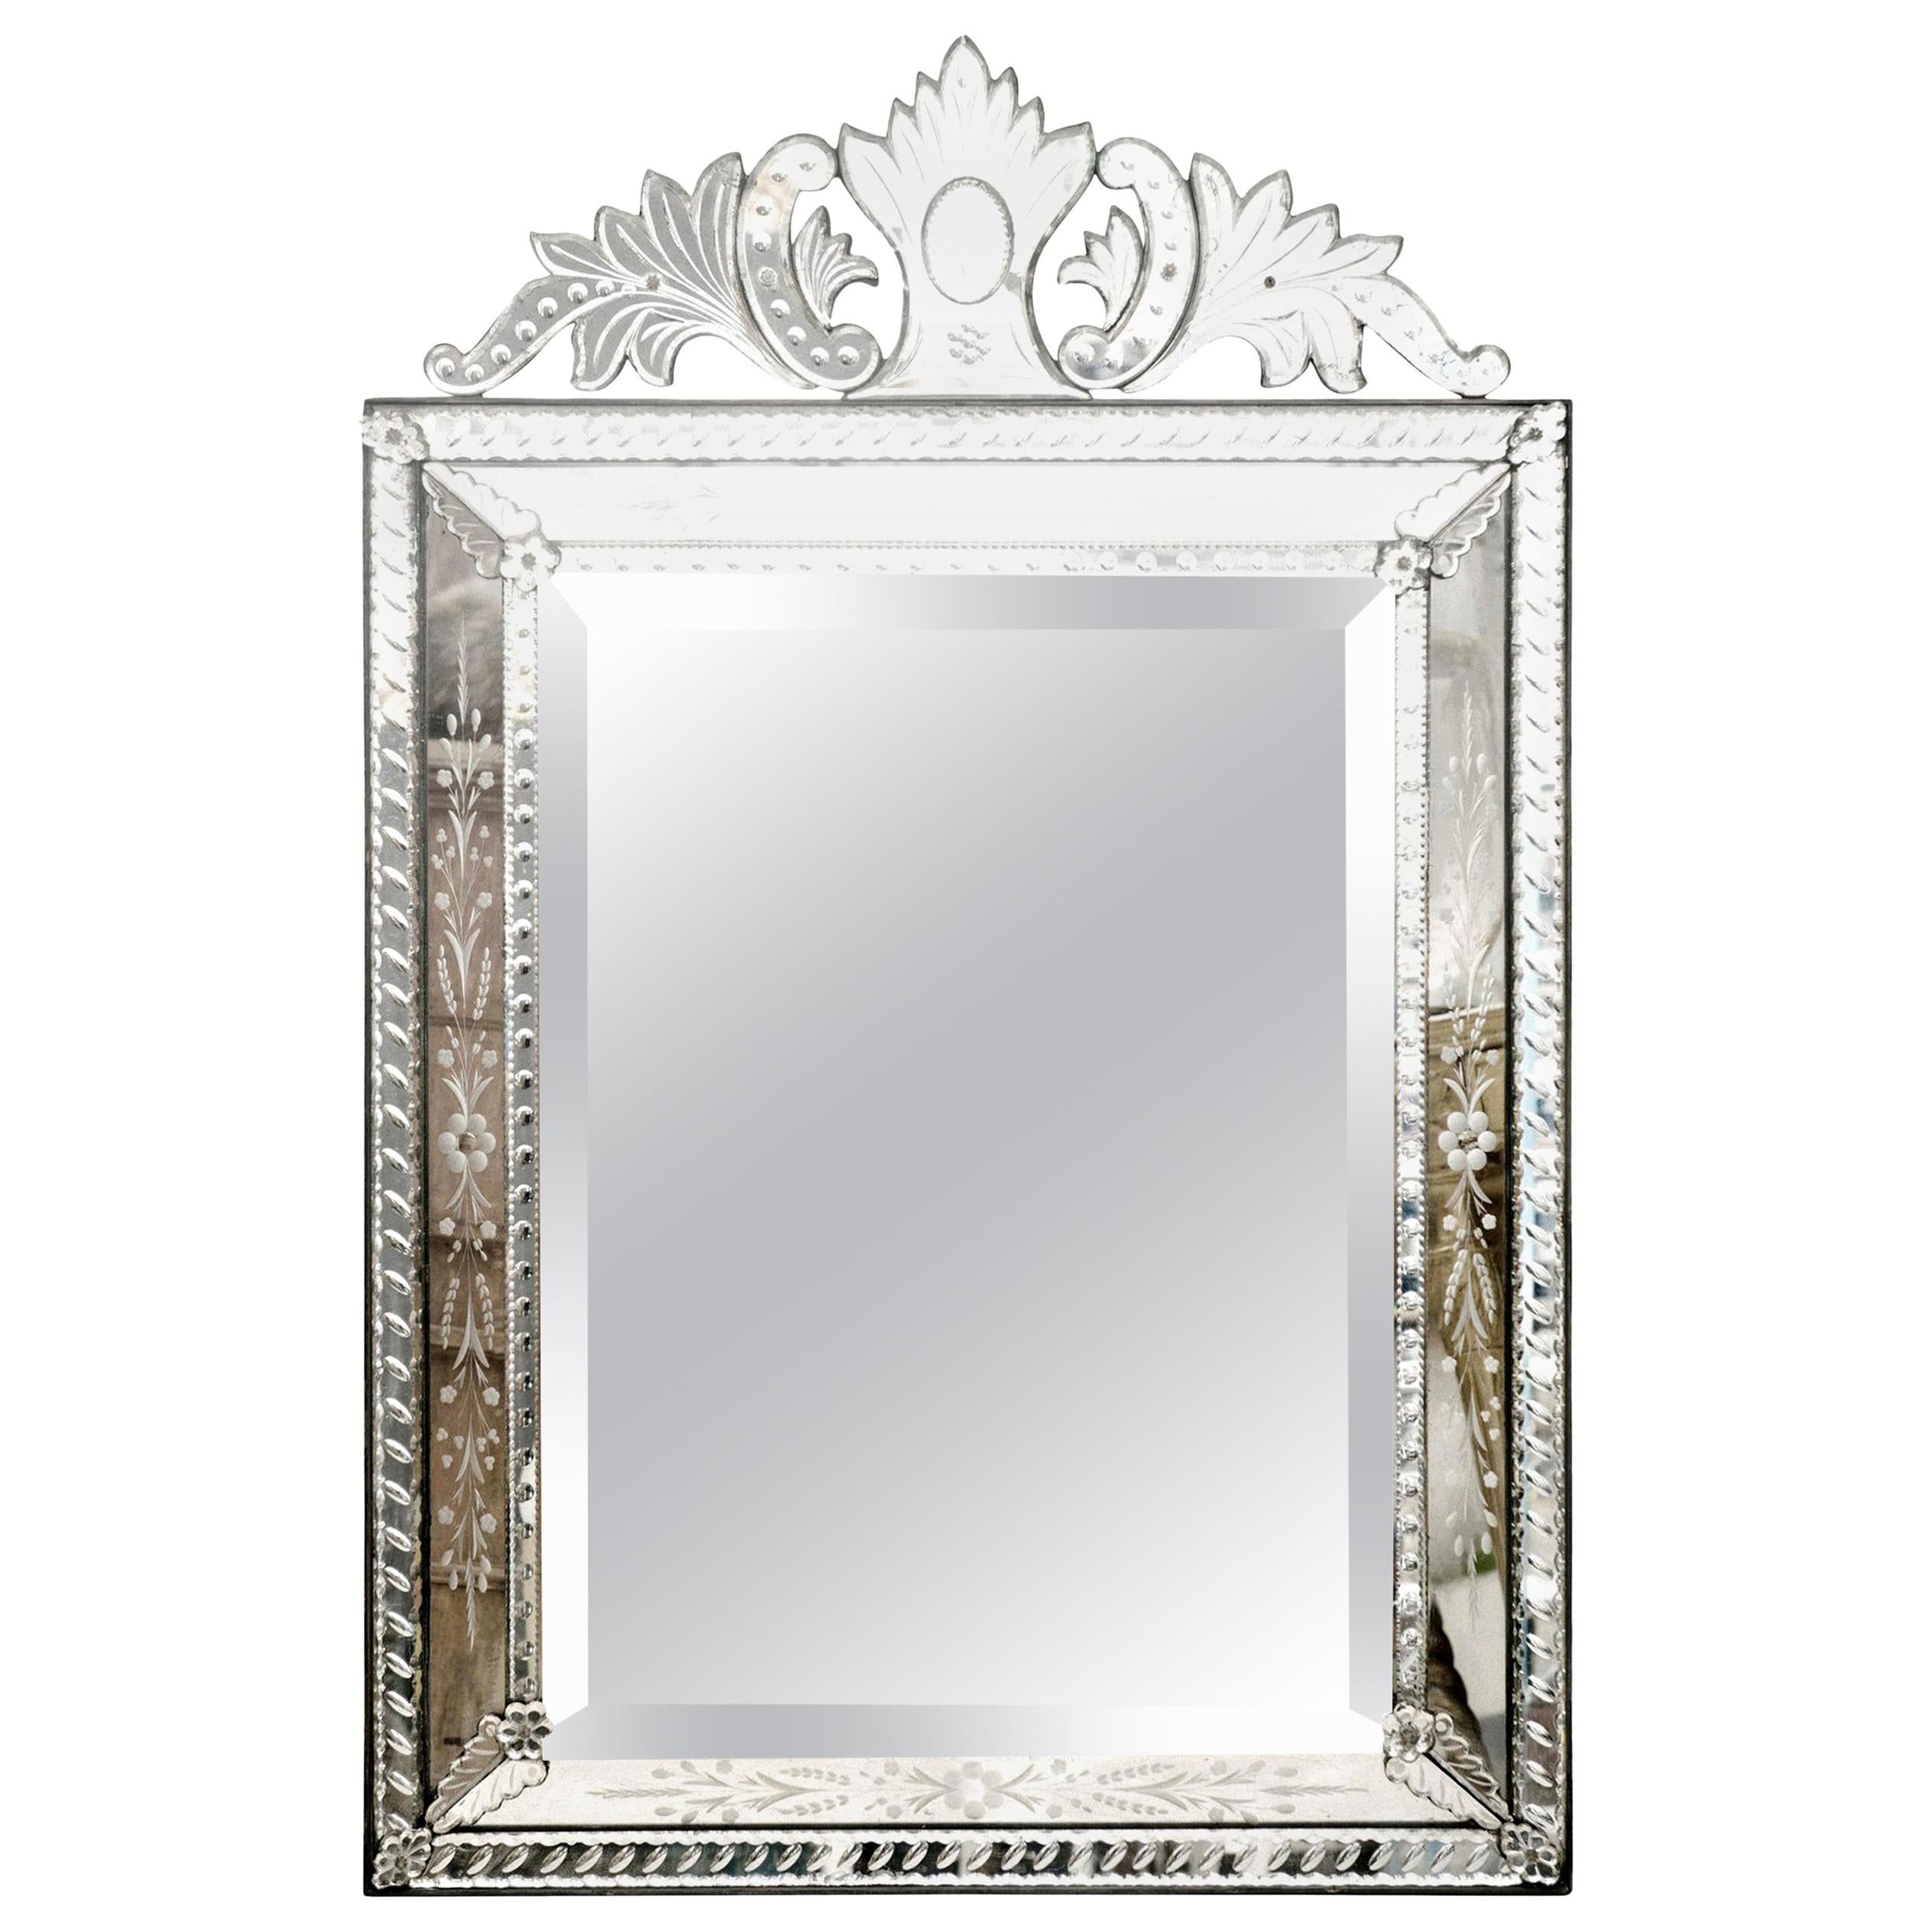 Venetian Mirror, Etched and Beveled, circa 1920